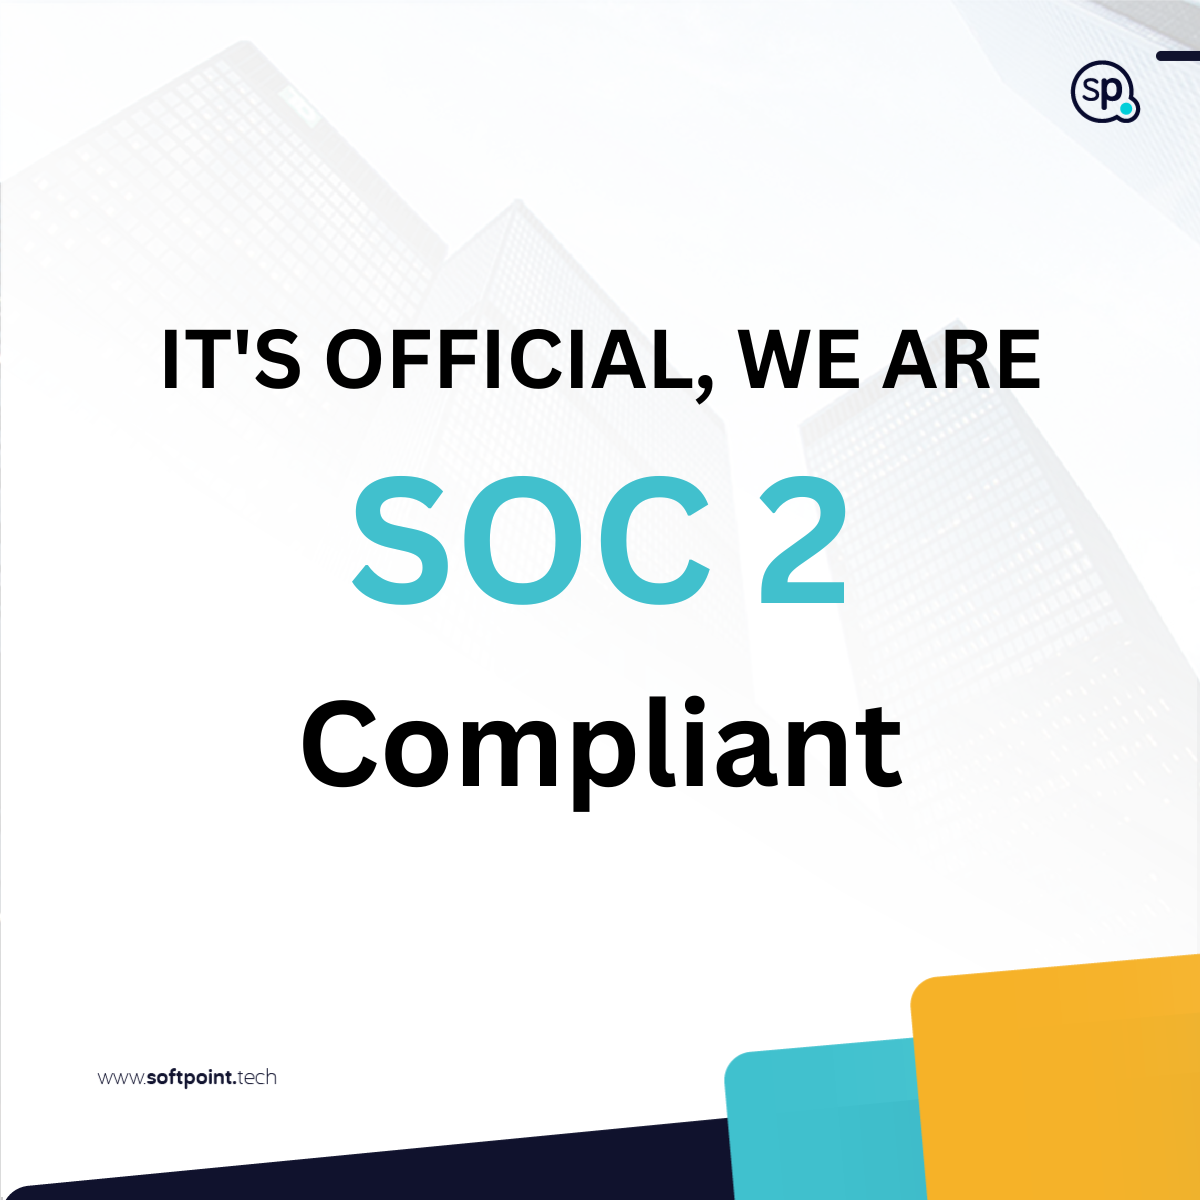 SoftPoint Certified with SOC 2 Type 1 Security Certification